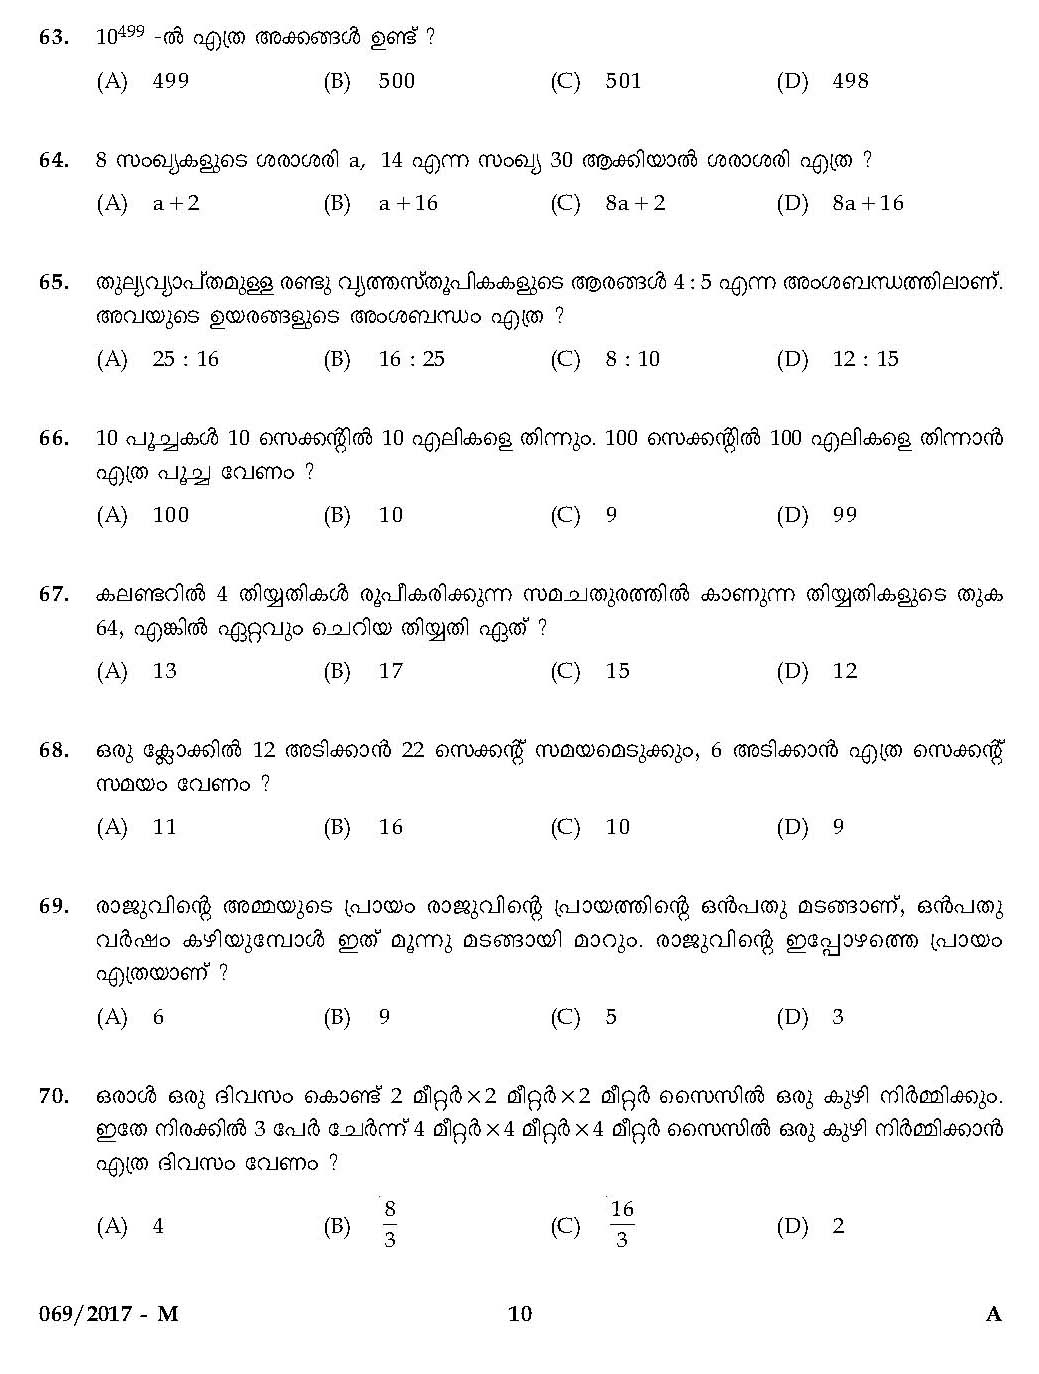 LD Clerk Question Paper 2017 Malayalam Paper Code 0692017 M 9